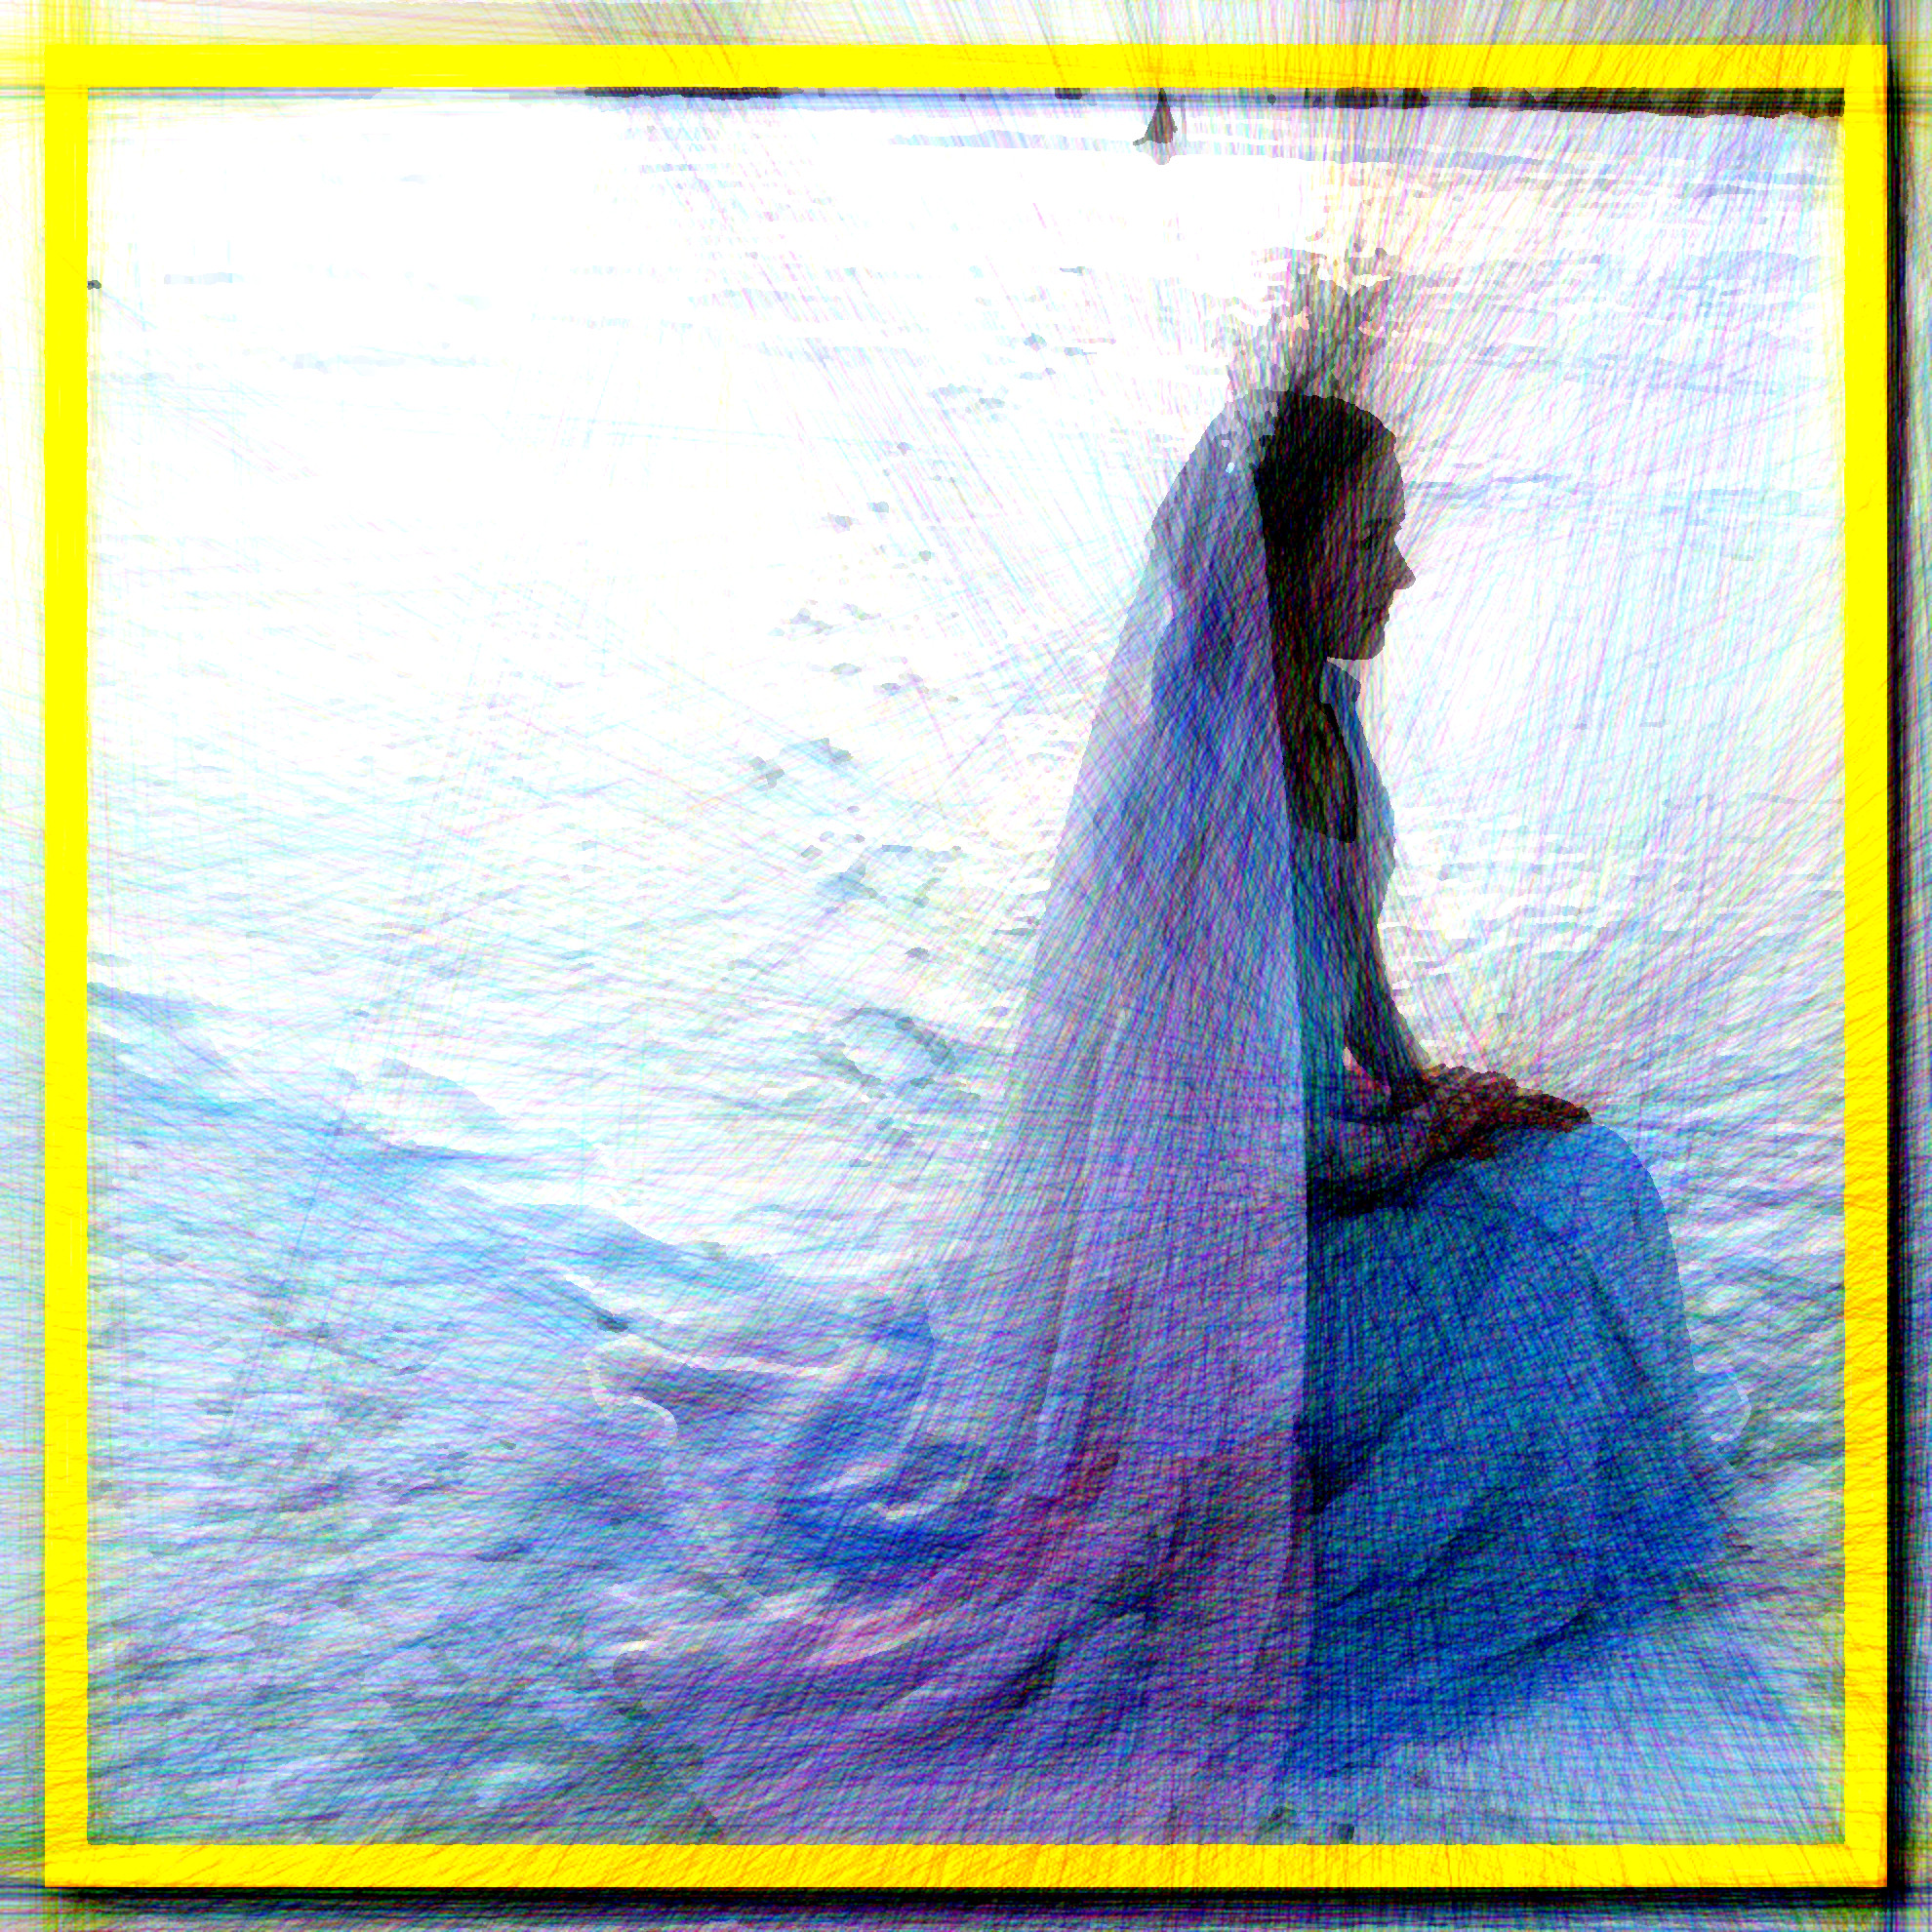 2023-05-28 09-01-16costume__winter_morning__by_aquilina108_dbl2sn2-fullview_portrait with a framed Artistic effect, style Linify.jpg